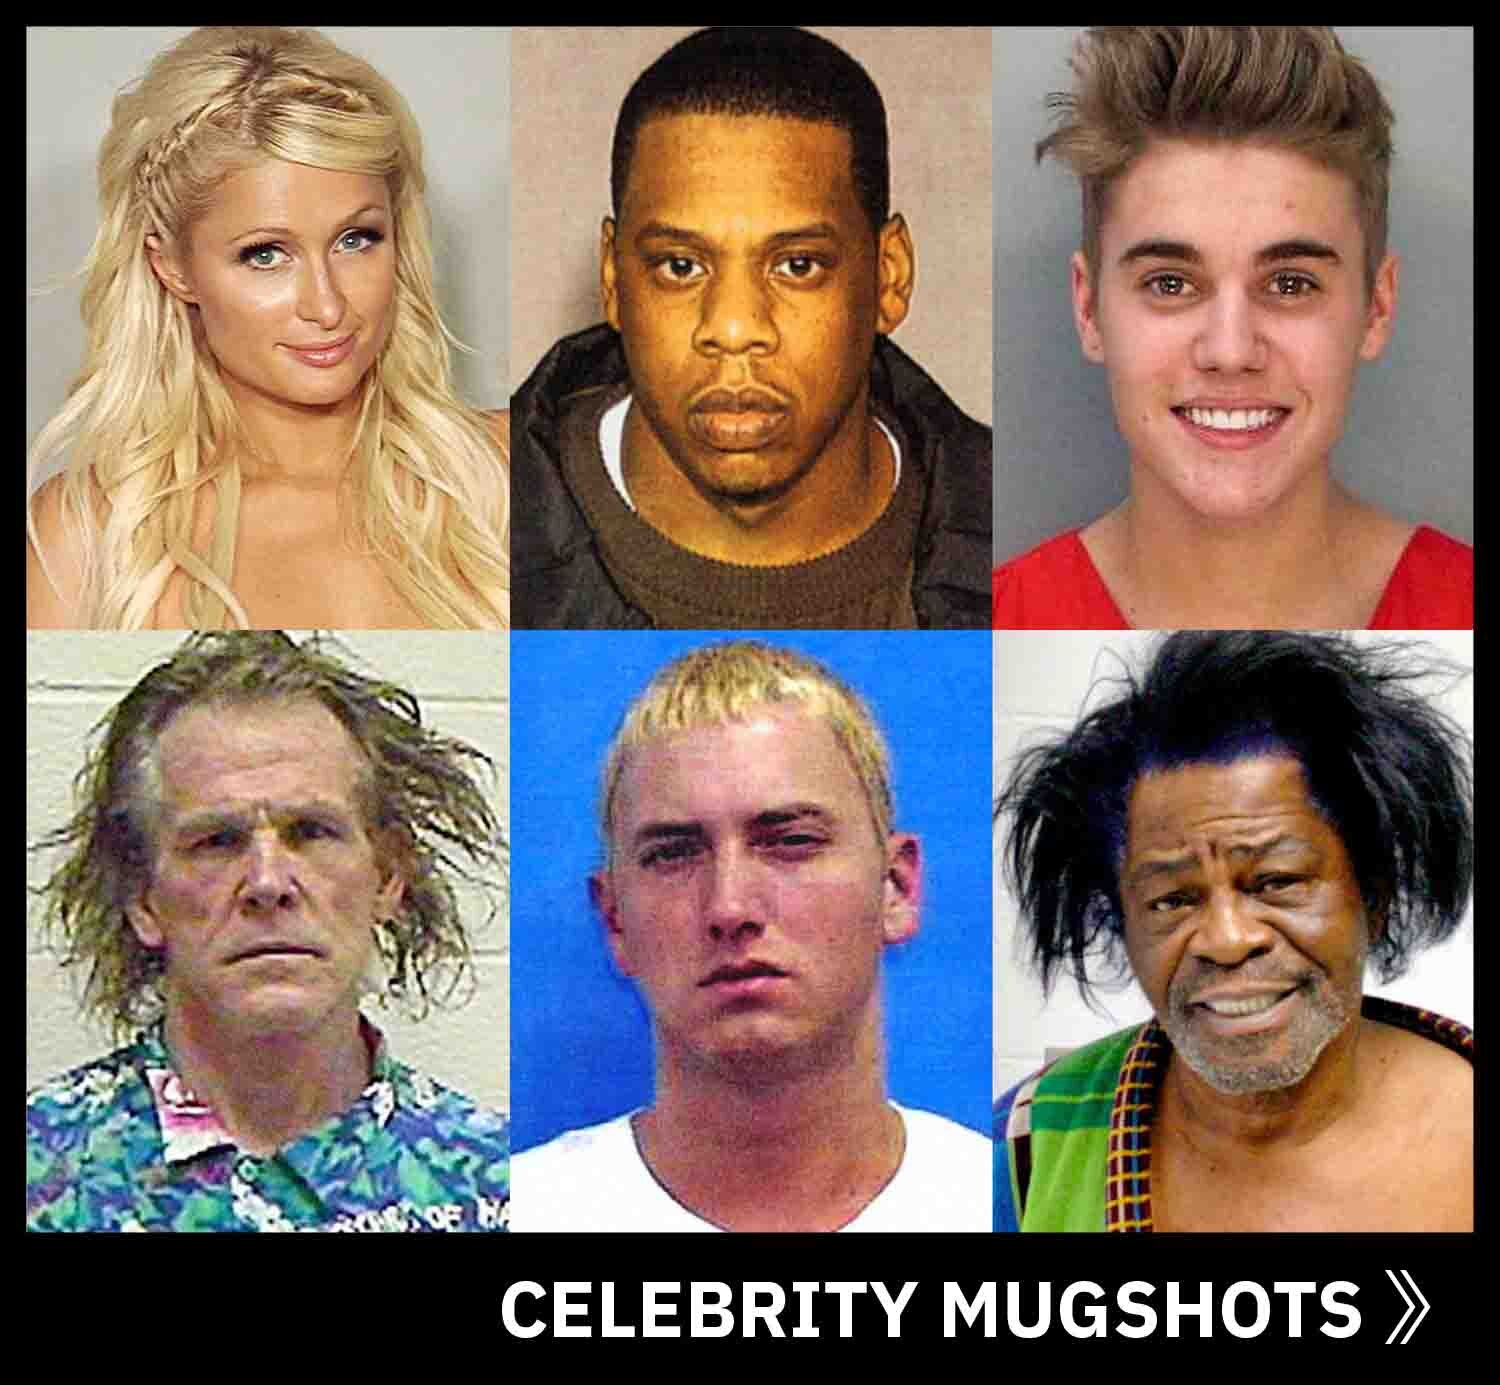 Click here to see a curated collection of the best famous celebrity mugshots of all time.